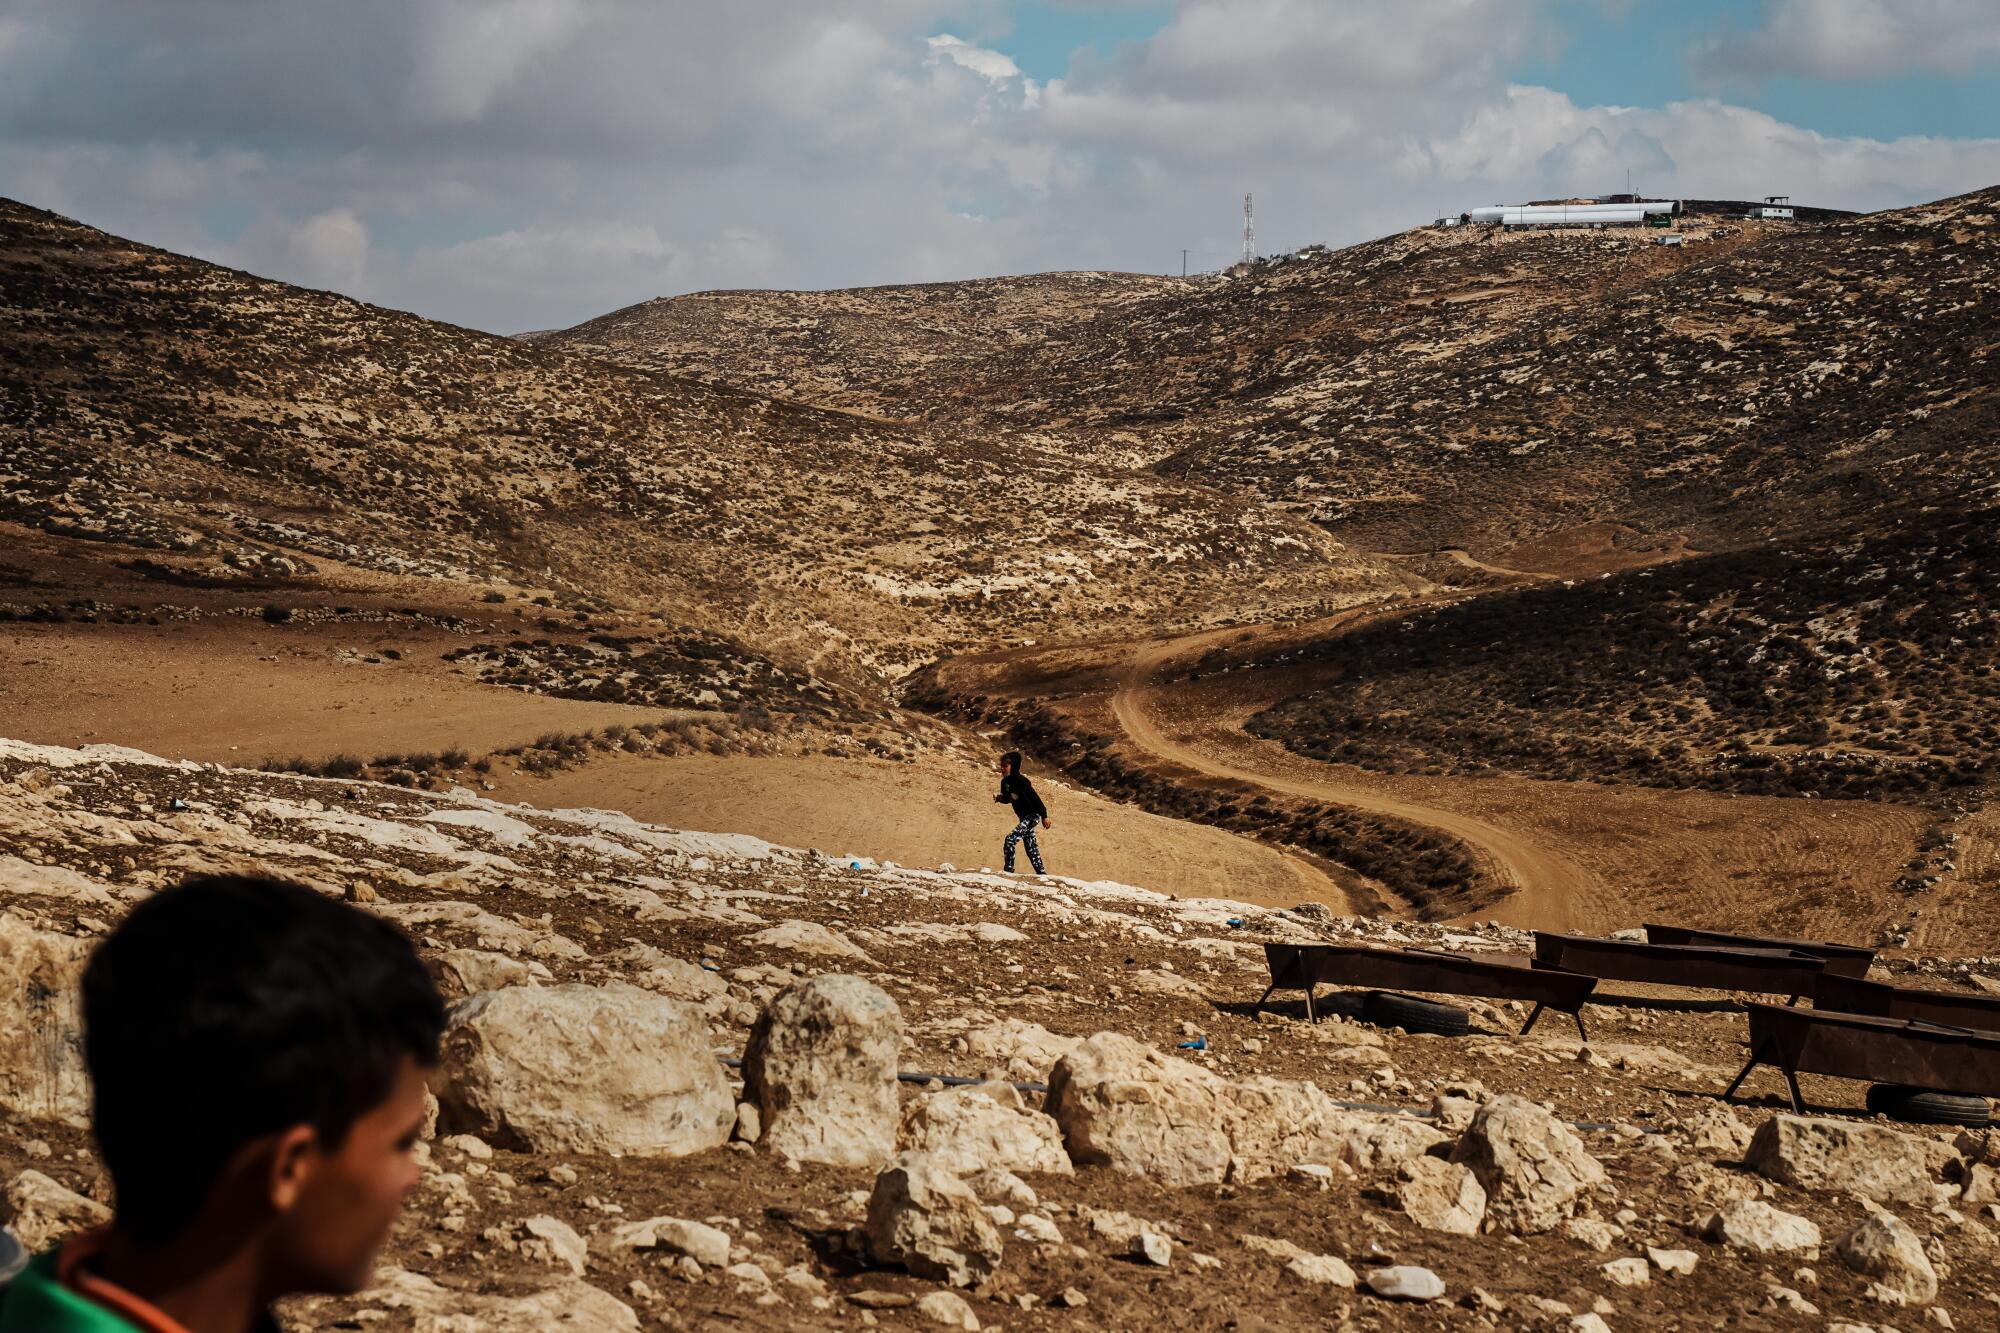 Israeli settlement that was build in the recent years on a hilltop as Palestinian children roam the hilly farmlands.